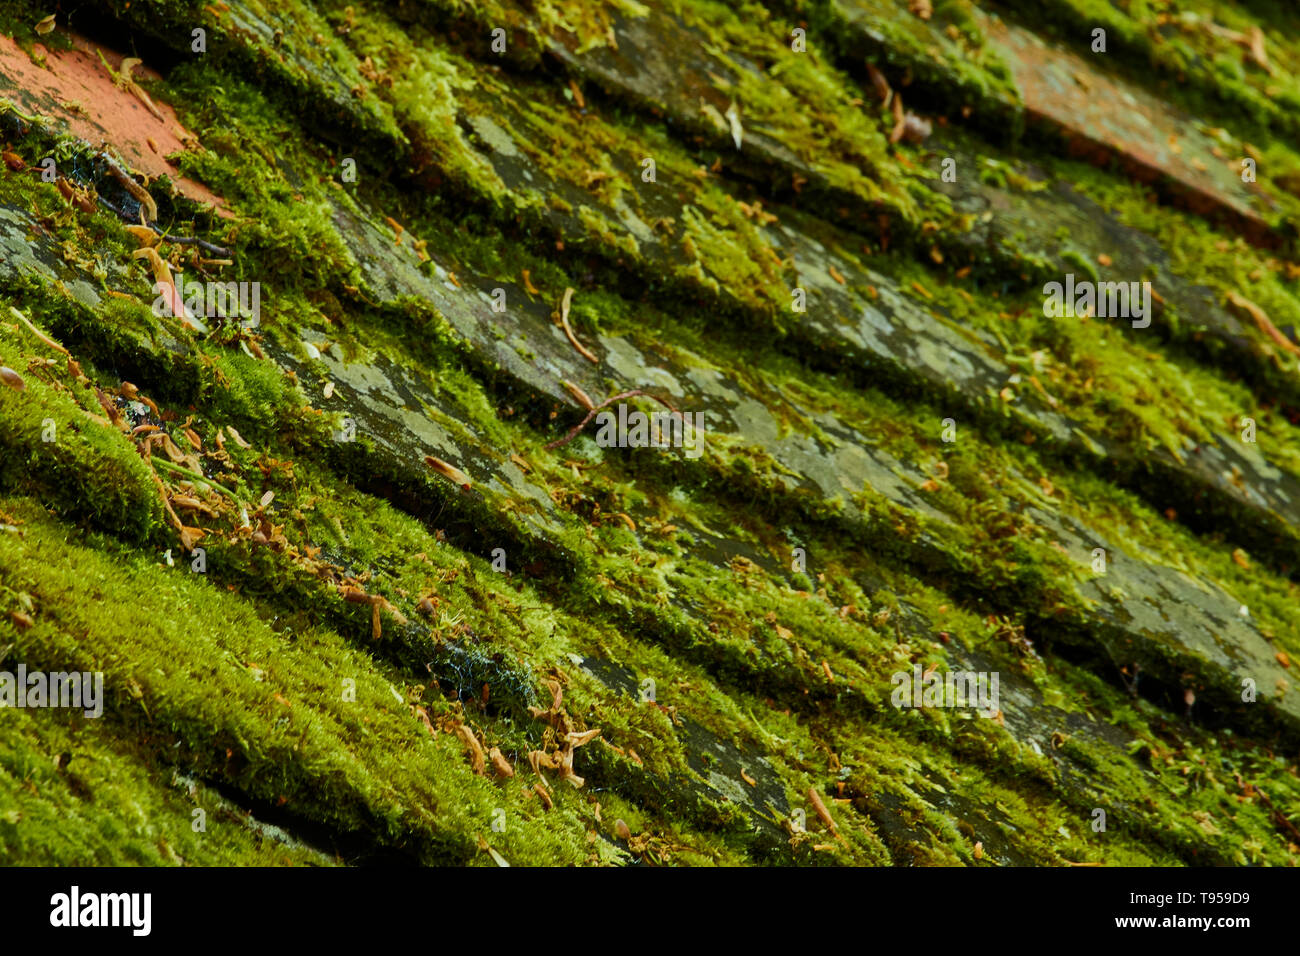 Abstract of roof covered in algae patterned tiles Stock Photo